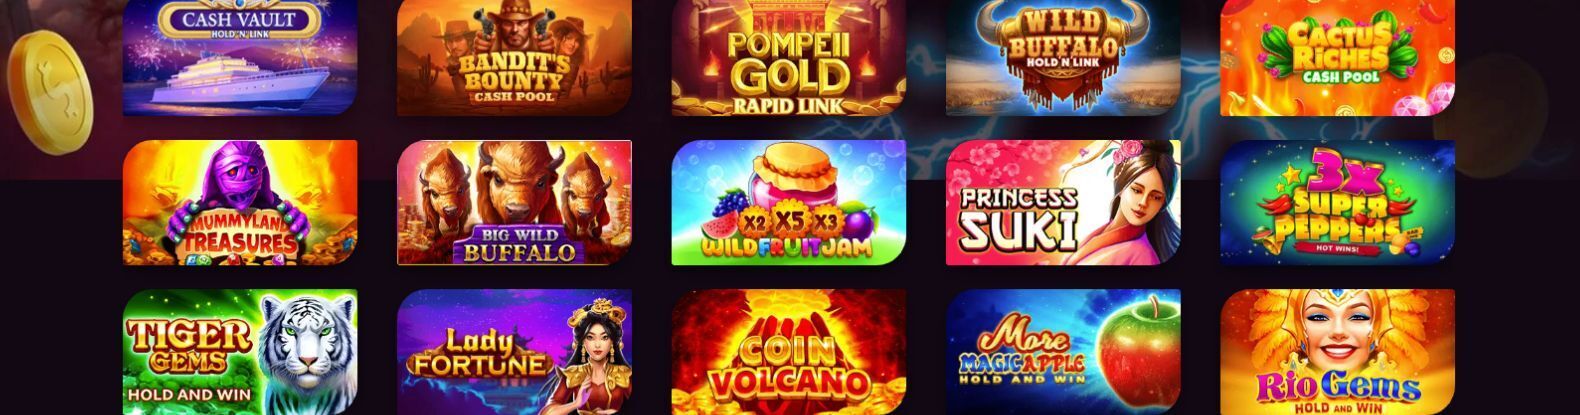 This is a screenshot of DundeeSlots Casino Games